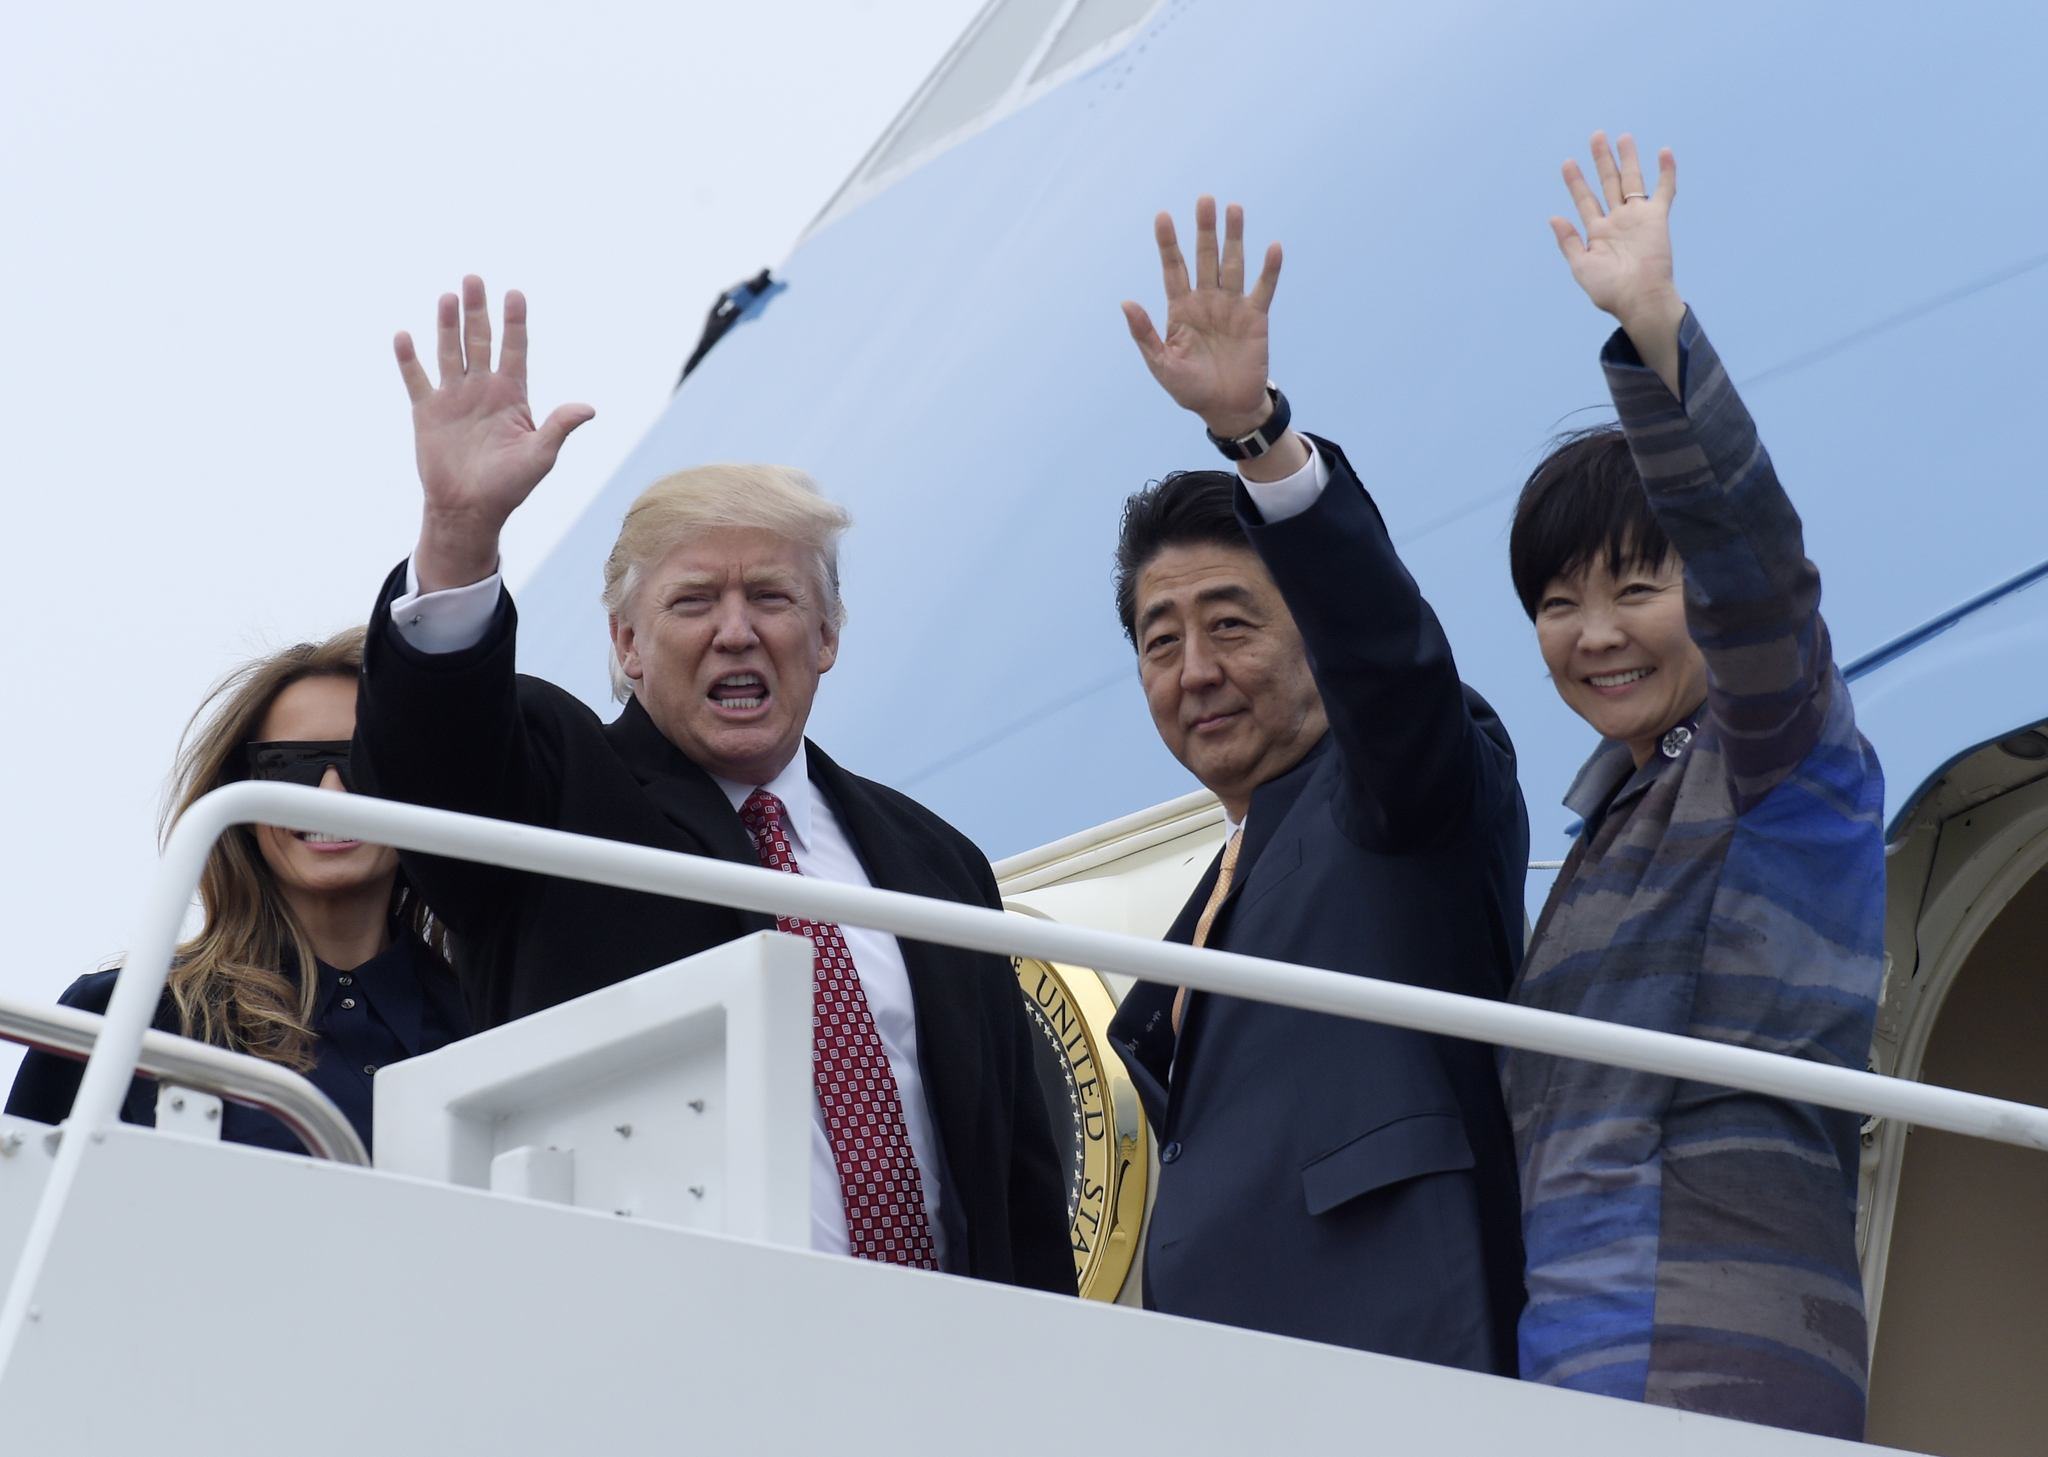 President Donald Trump and Japanese Prime Minister Shinzo Abe, accompanied by their wives, first lady Melania Trump and Akie Abe, wave before boarding Air Force One at Andrews Air Force Base Maryland on Friday, Feb. 10, 2017. Trump is hosting Abe at his estate Mar-a-Lago in Palm Beach, Florida for the weekend. (Susan Walsh | The Associated Press)